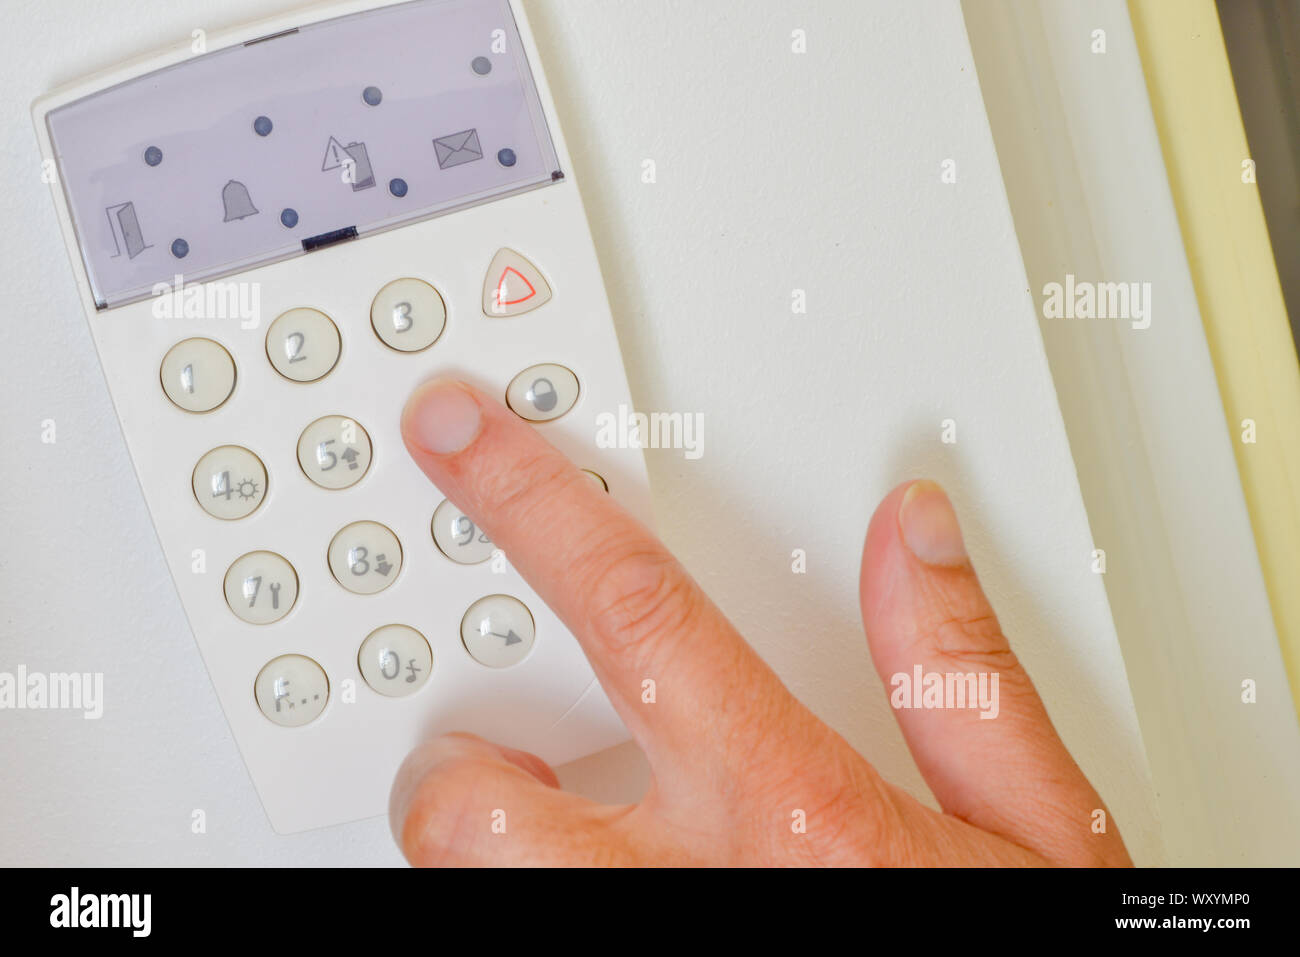 Hand is setting home security alarm system Stock Photo